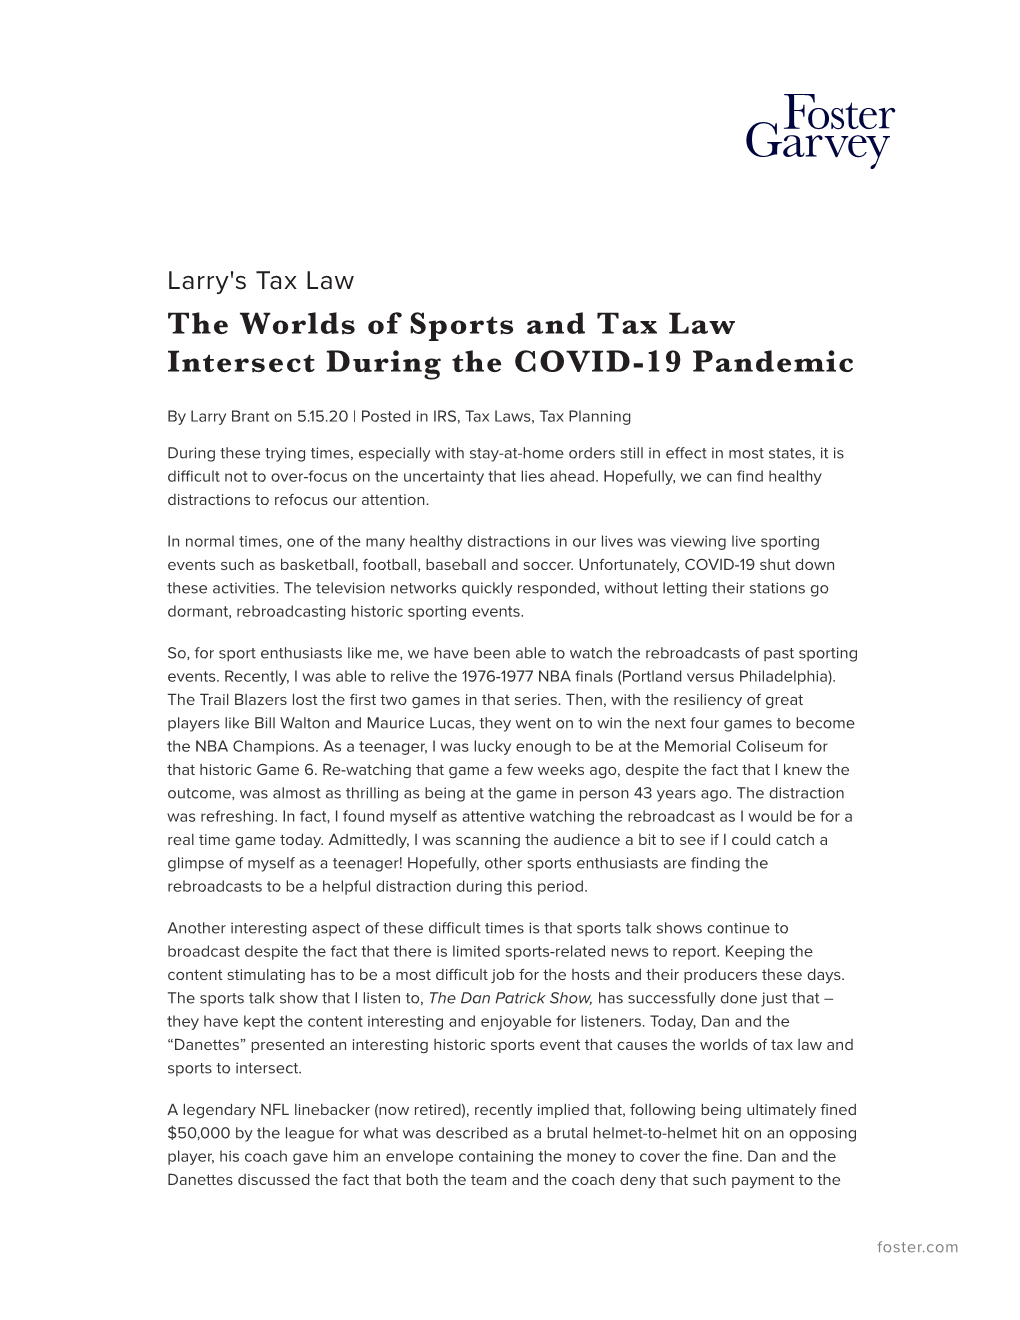 The Worlds of Sports and Tax Law Intersect During the COVID-19 Pandemic